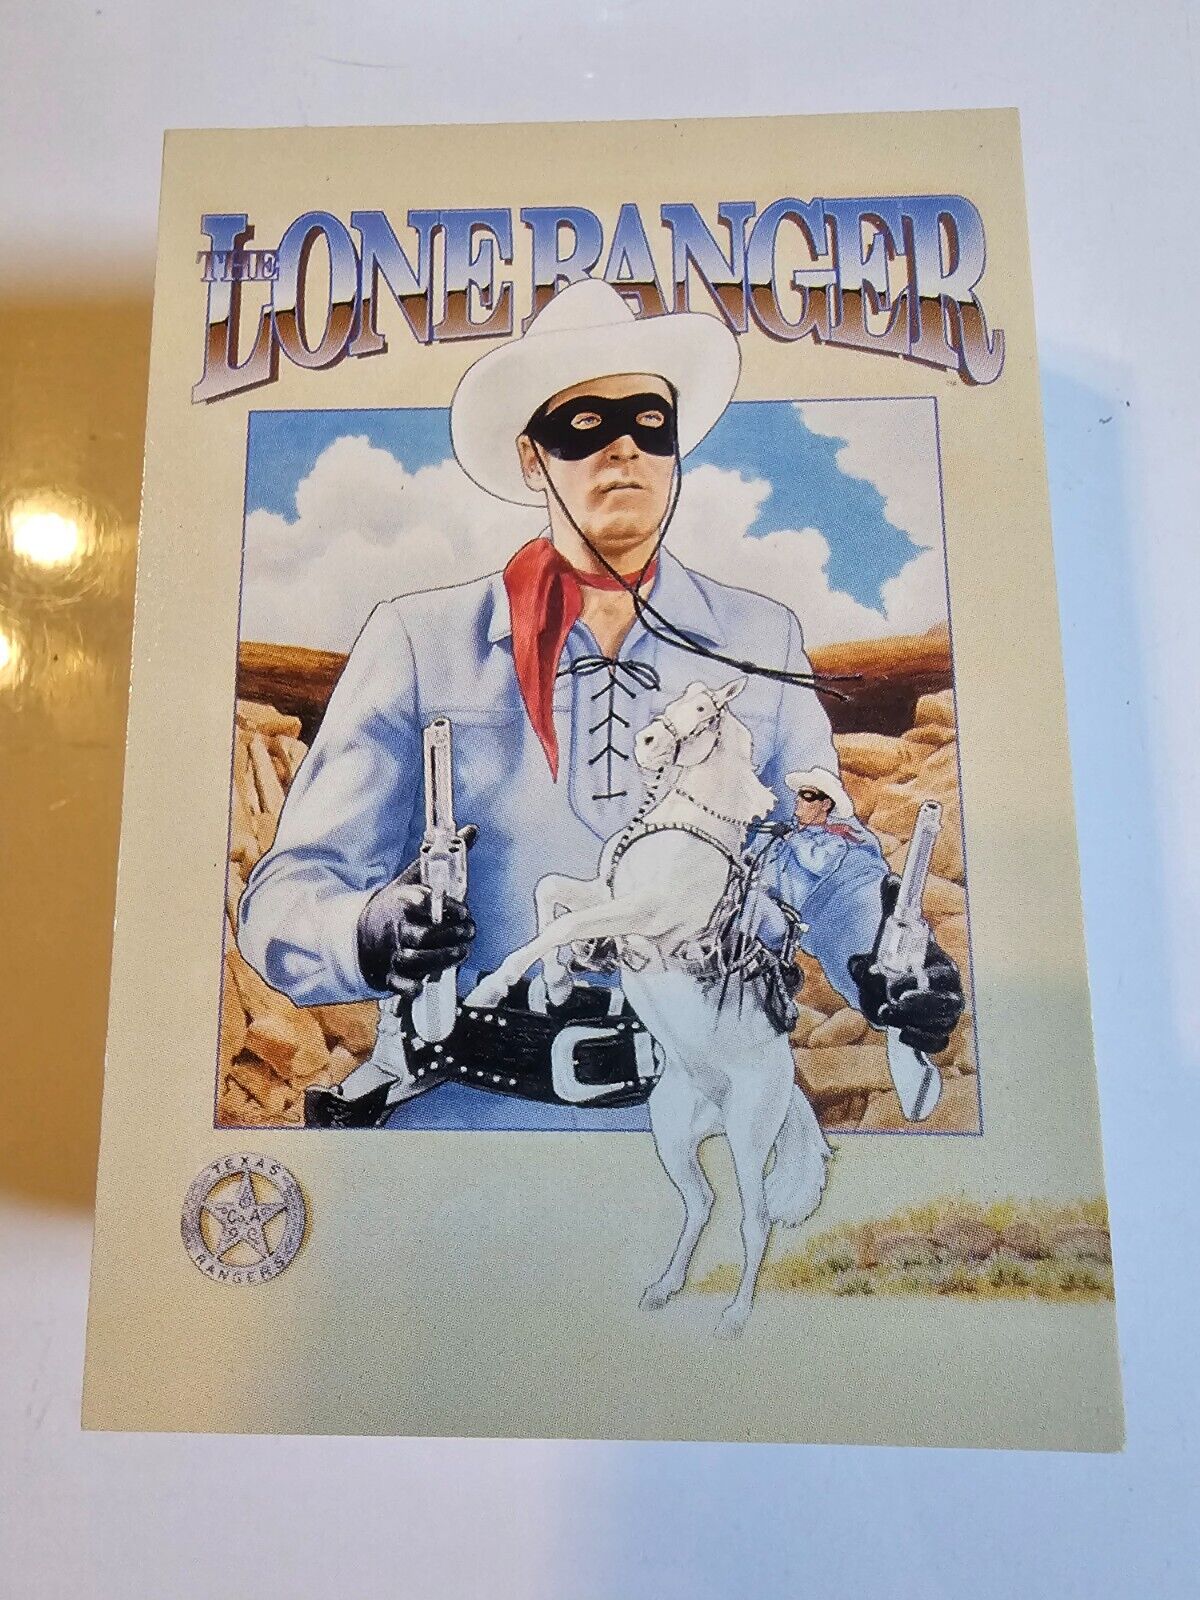 1997 The Lone Ranger Complete Card Set (1-72)